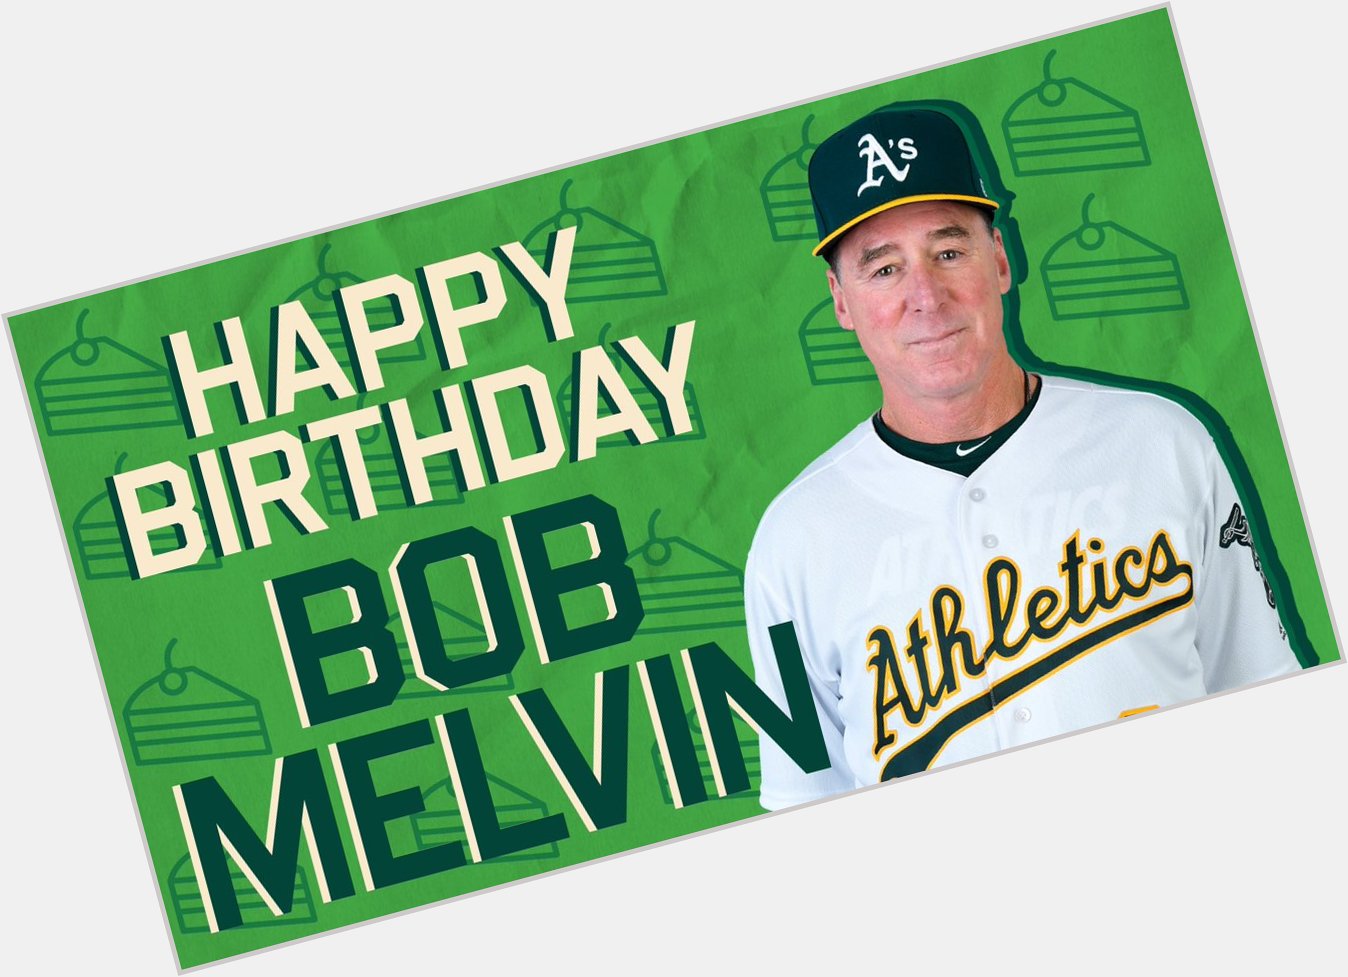 And our leader on the field. Happy birthday, Bob Melvin! 